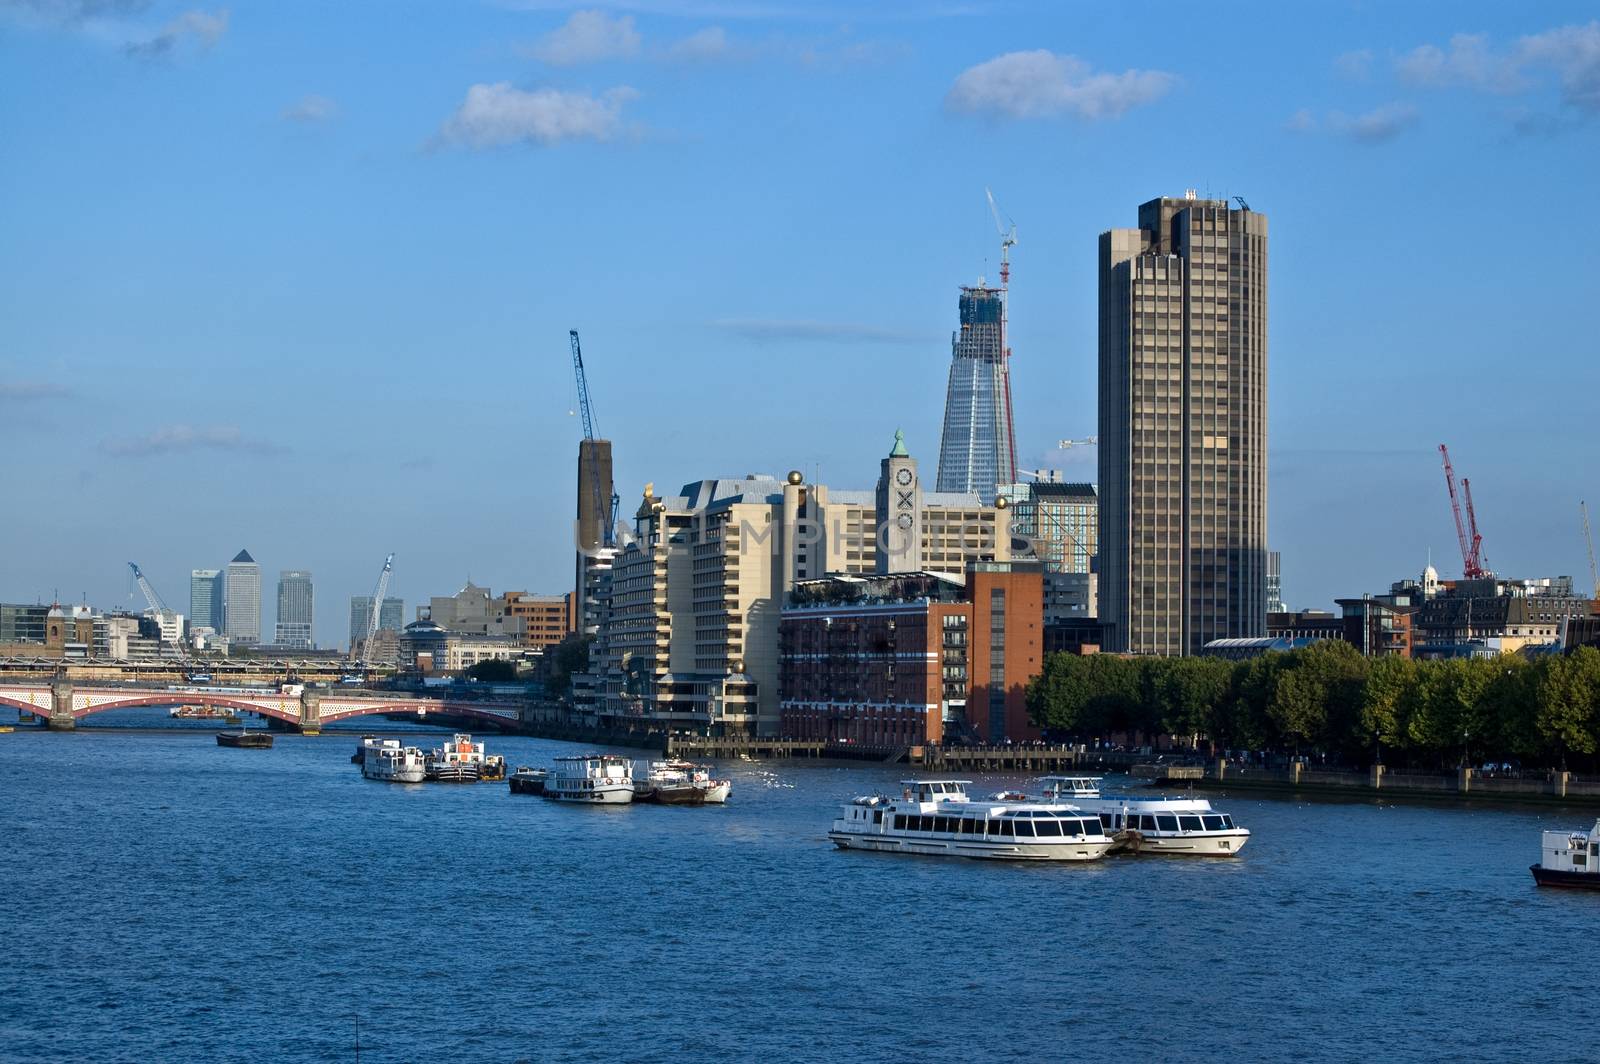 South Bank of the River Thames at Lambeth, London by BasPhoto